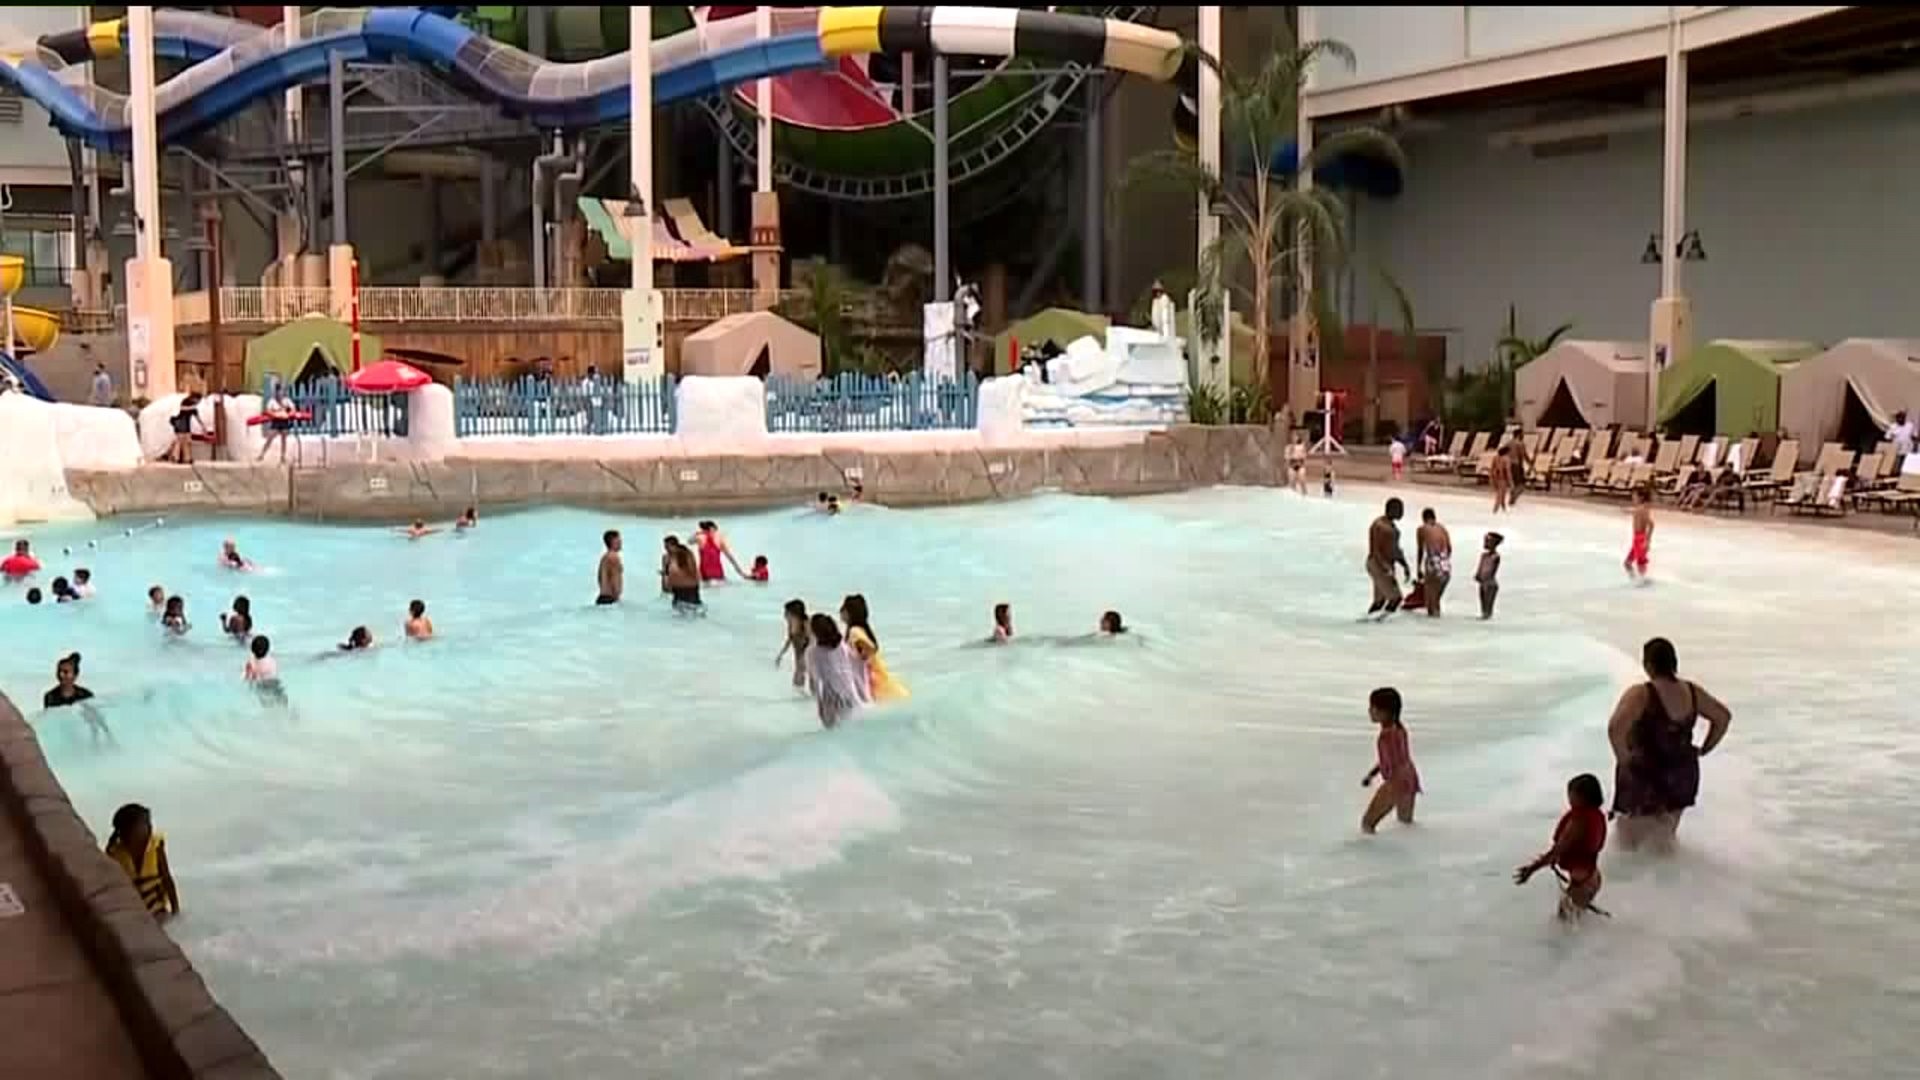 Free Day at the Water Park for Families Impacted by 9/11